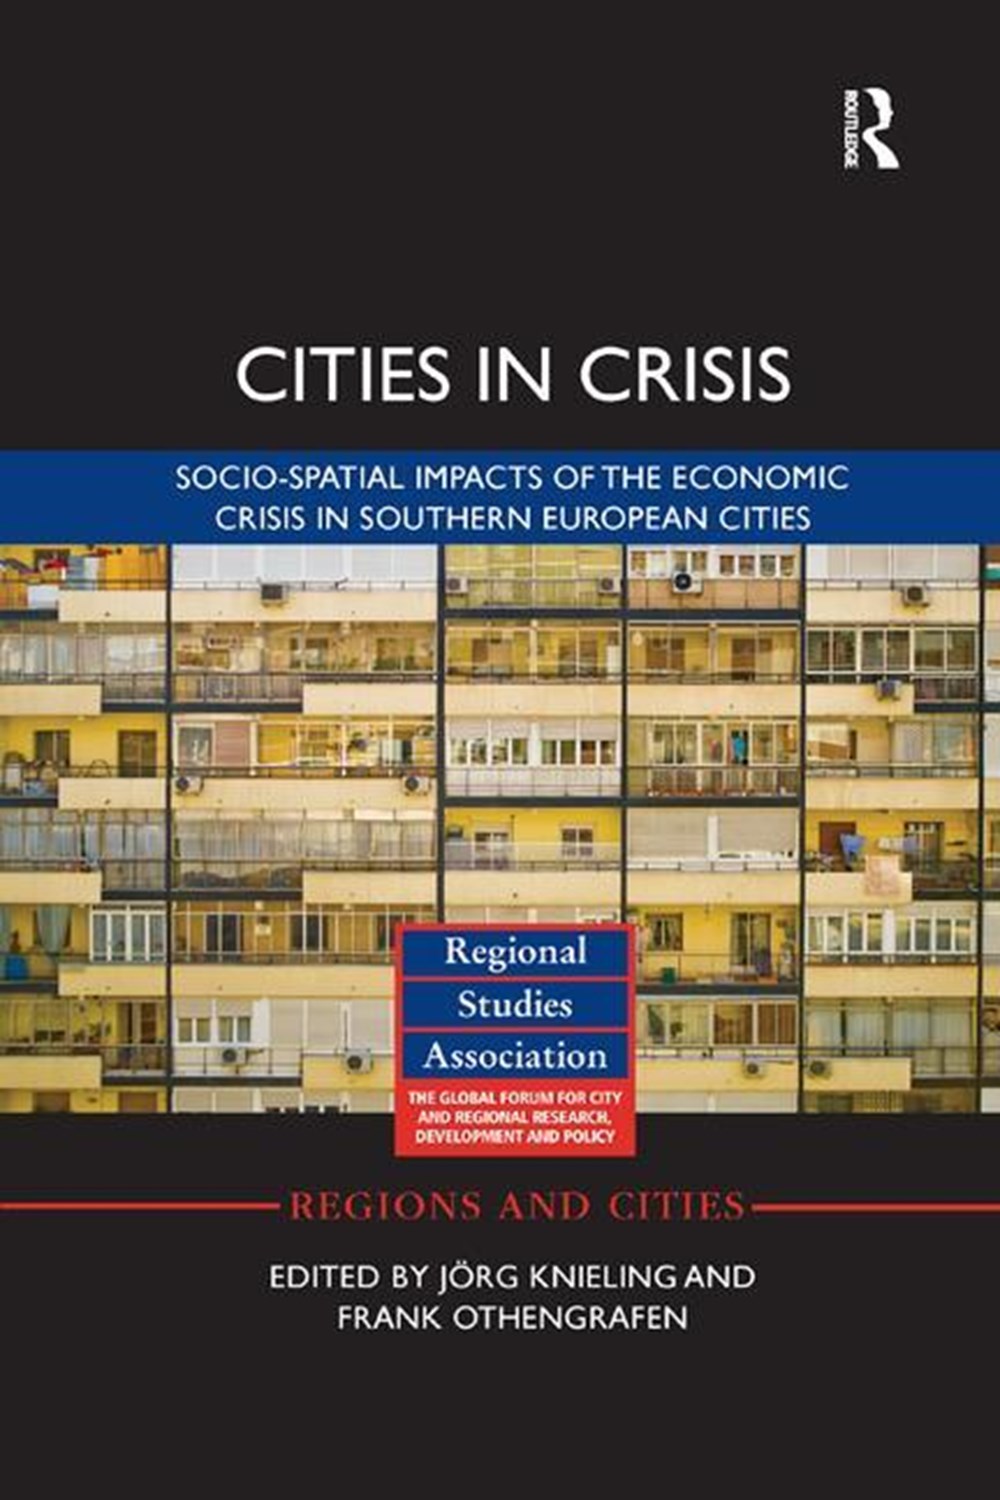 Cities in Crisis: Socio-Spatial Impacts of the Economic Crisis in Southern European Cities